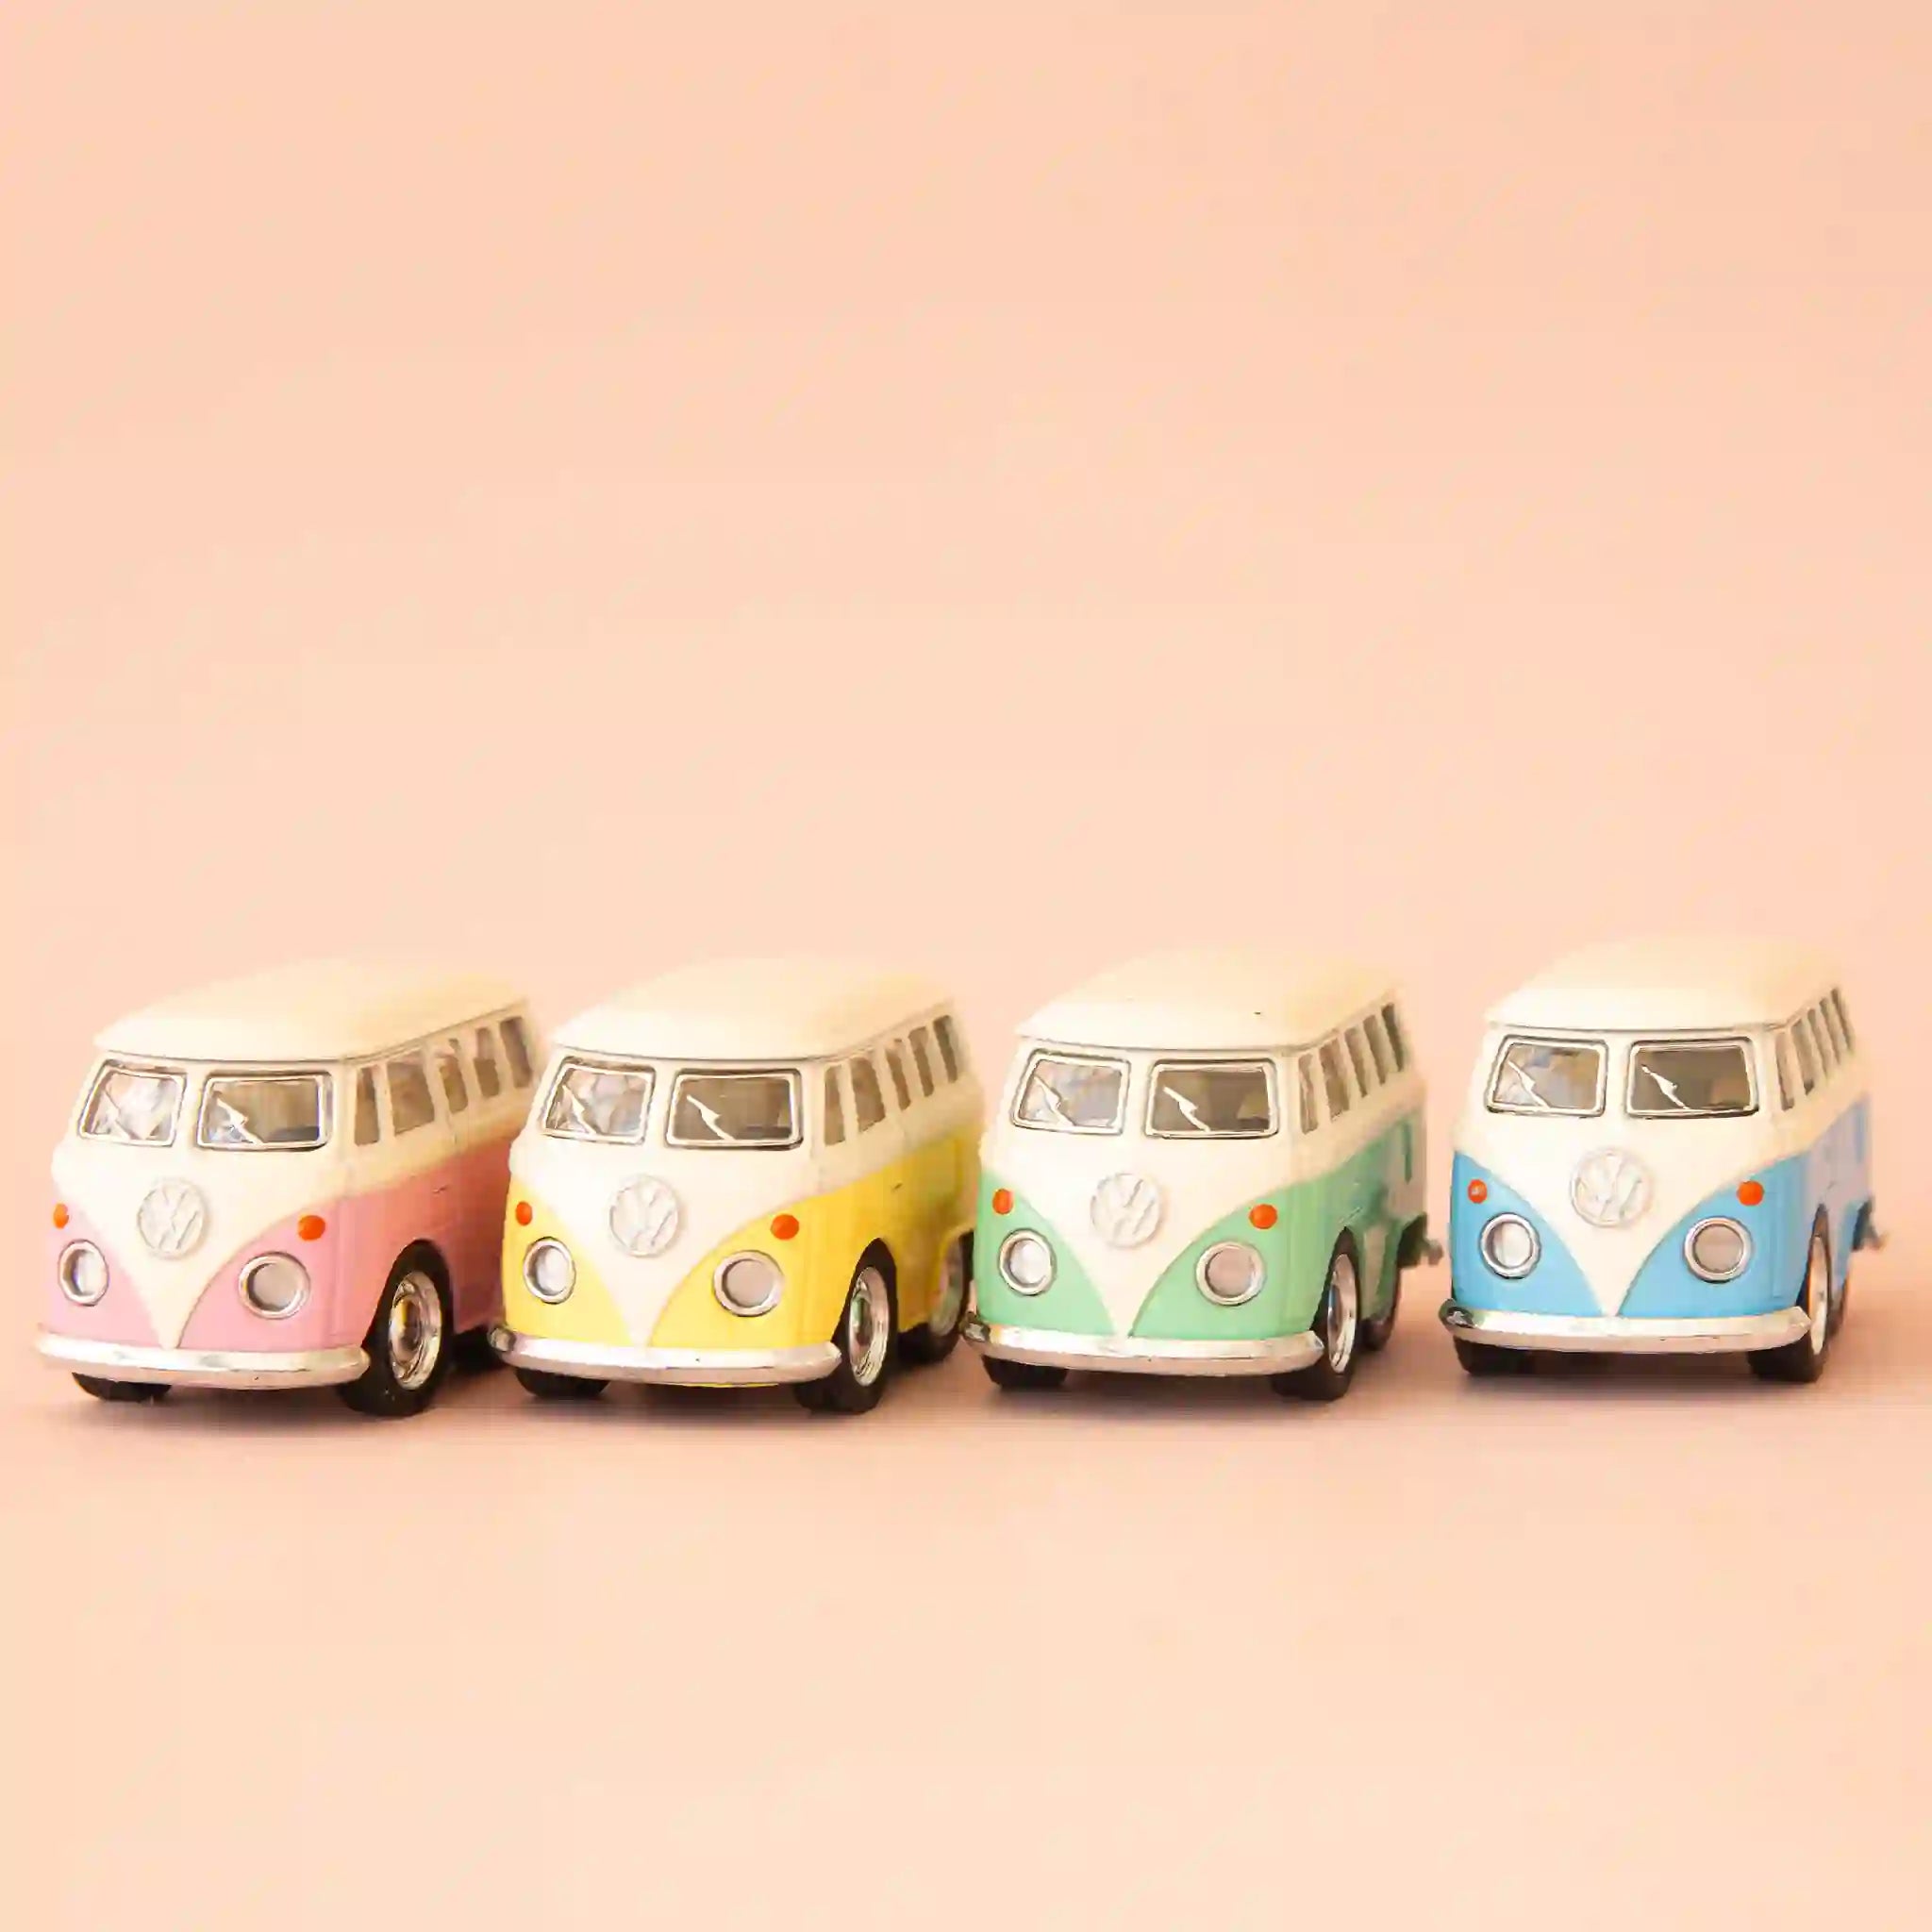 On a peachy background is four different mini vw buses in four different colors. From left to right, there is pink, yellow, green and blue.